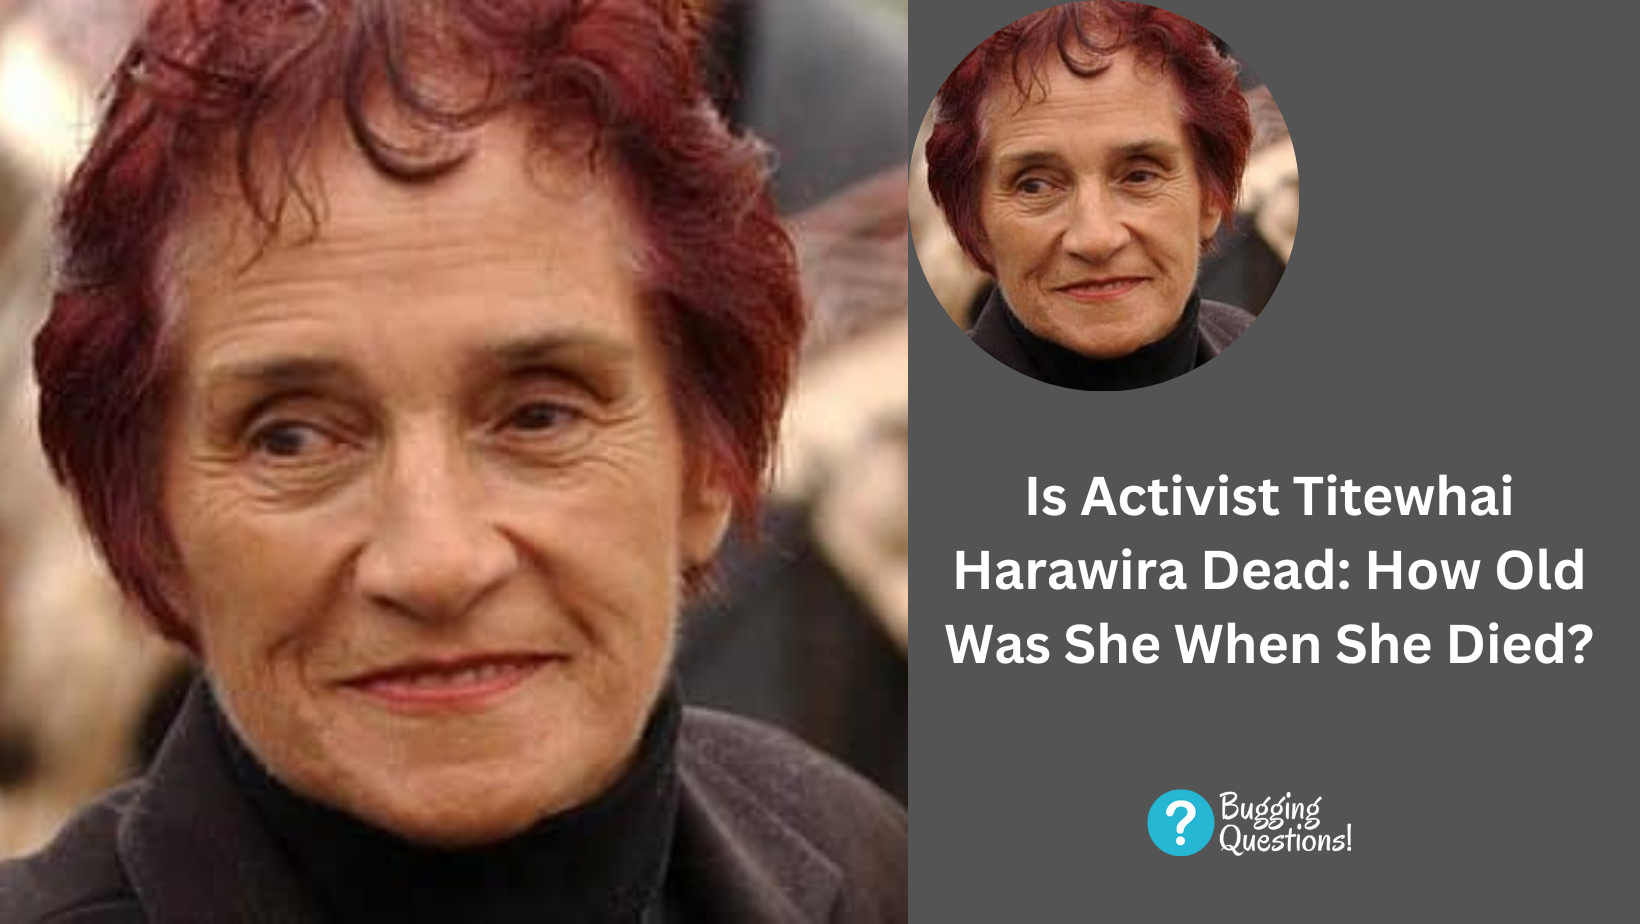 Is Activist Titewhai Harawira Dead: How Old Was She When She Died?